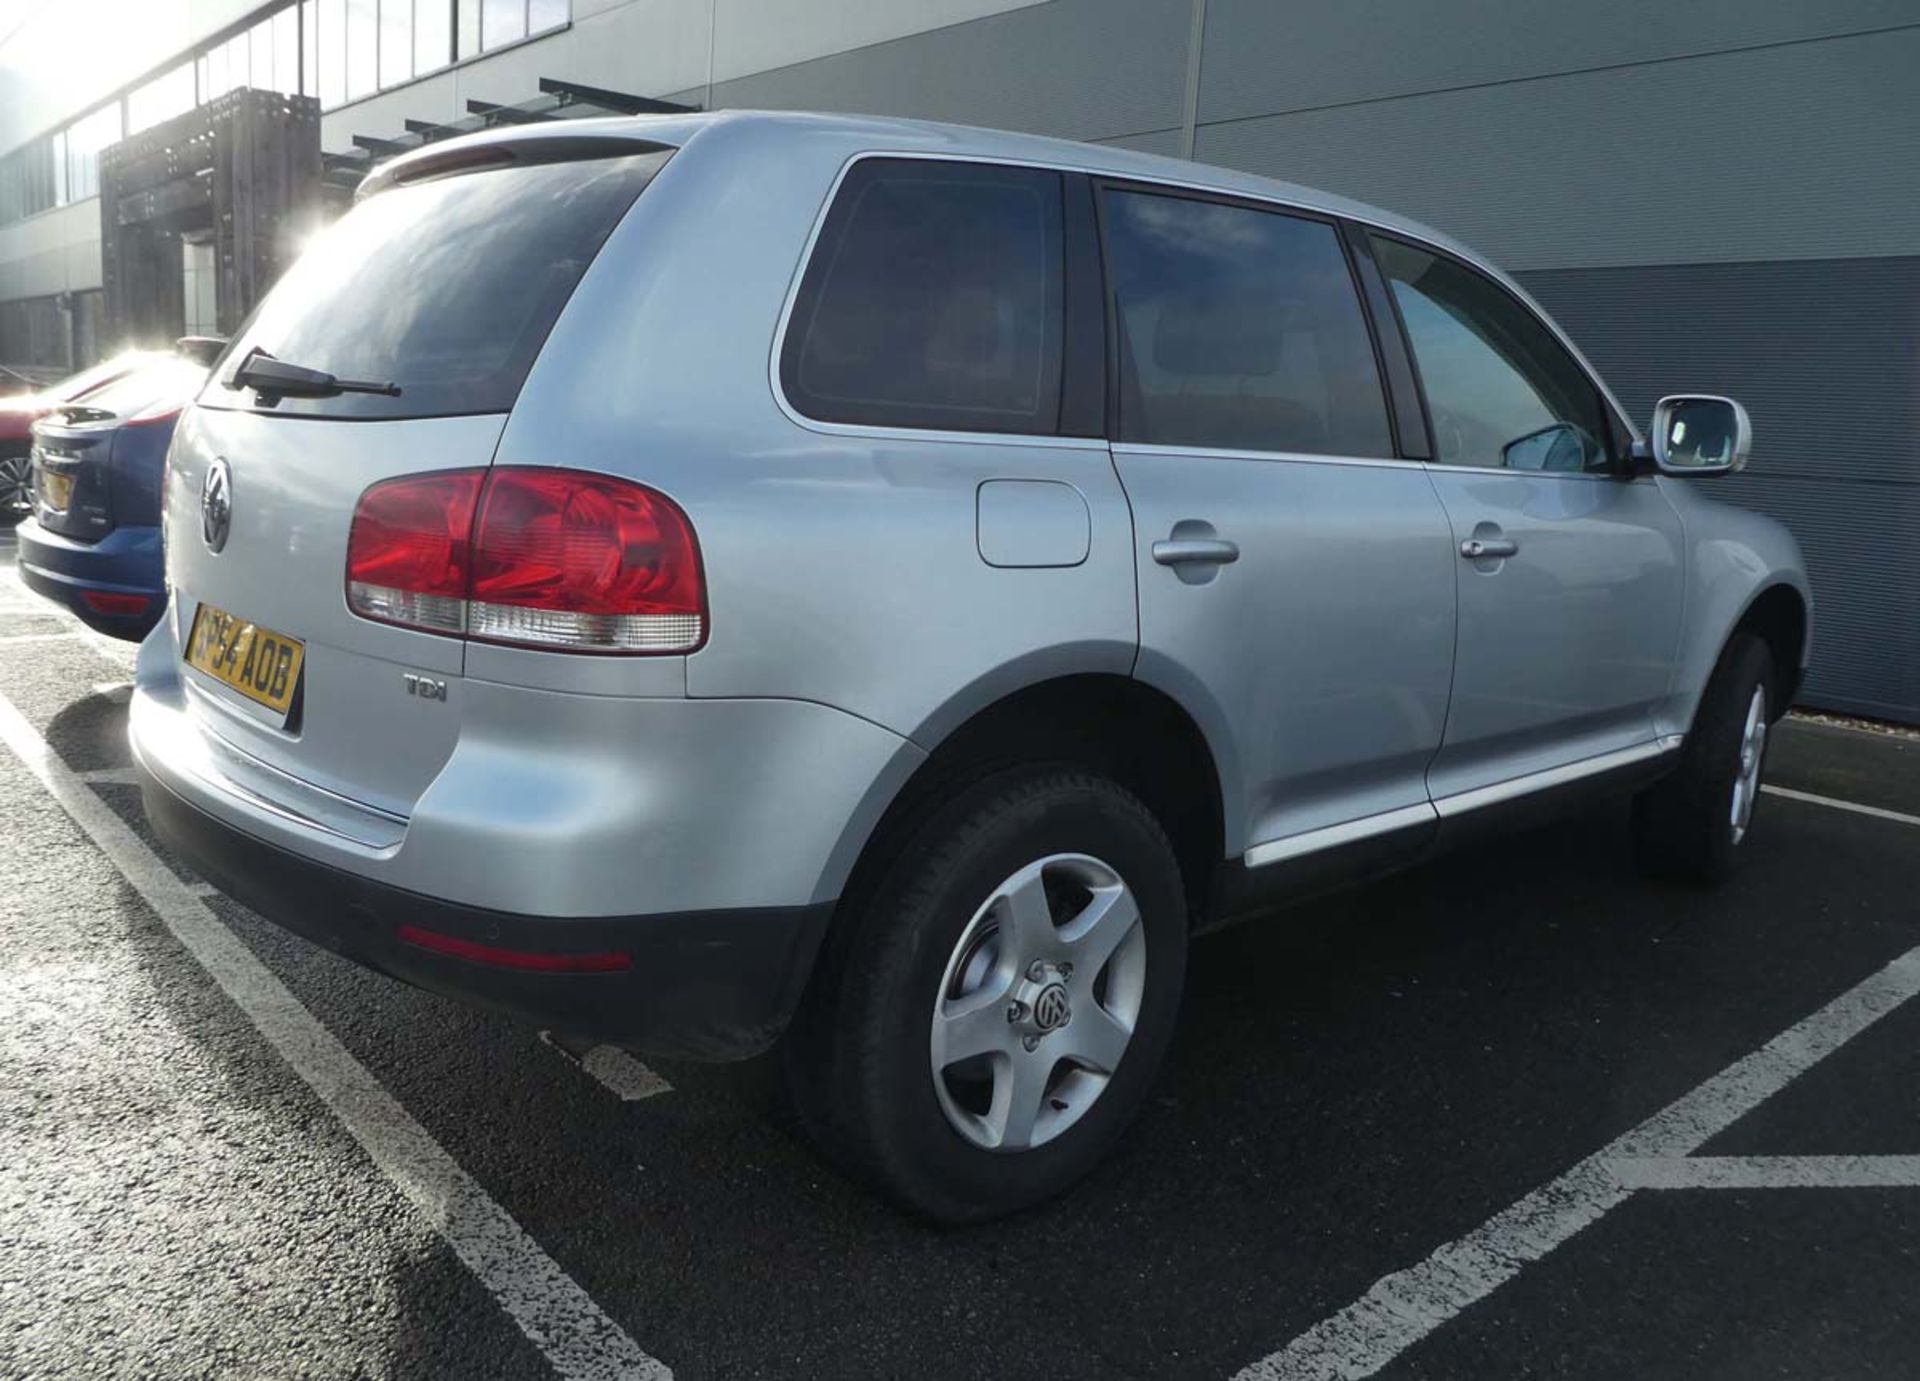 SP54 AOB (2004) Volkswagen Estate Touareg TDI in silver, 2461cc, diesel, 3 former keepers, 1 key, - Image 3 of 12